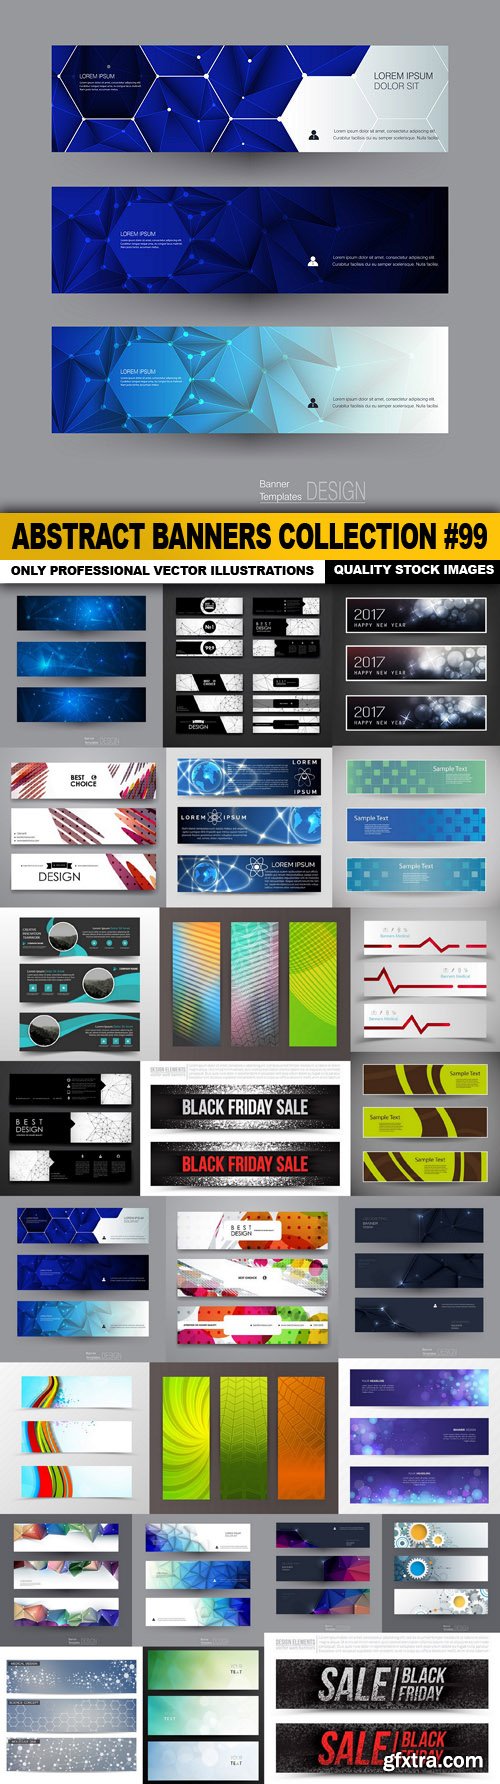 Abstract Banners Collection #99 - 25 Vectors